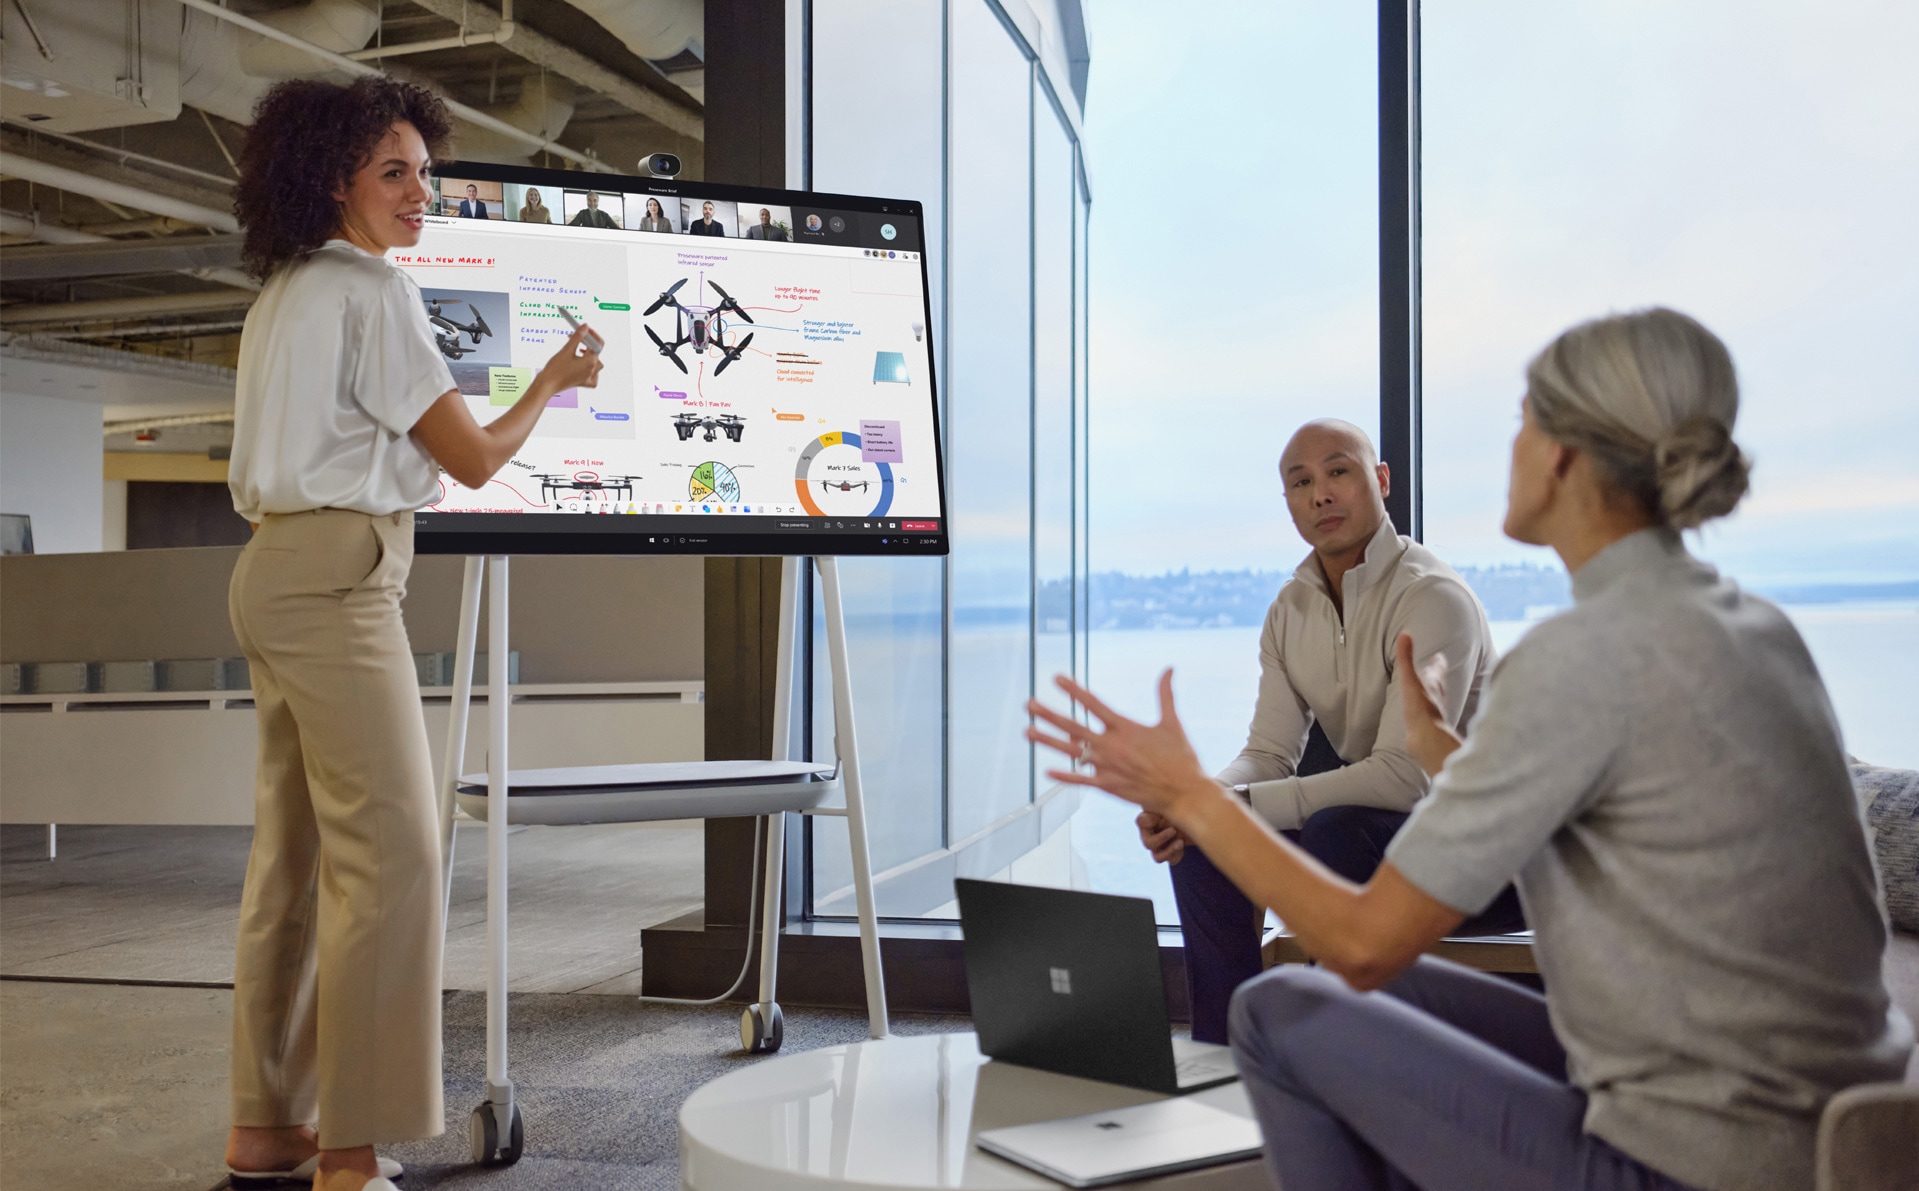 In-person coworkers interact with a PowerPoint presentation in Teams while remote coworkers observe